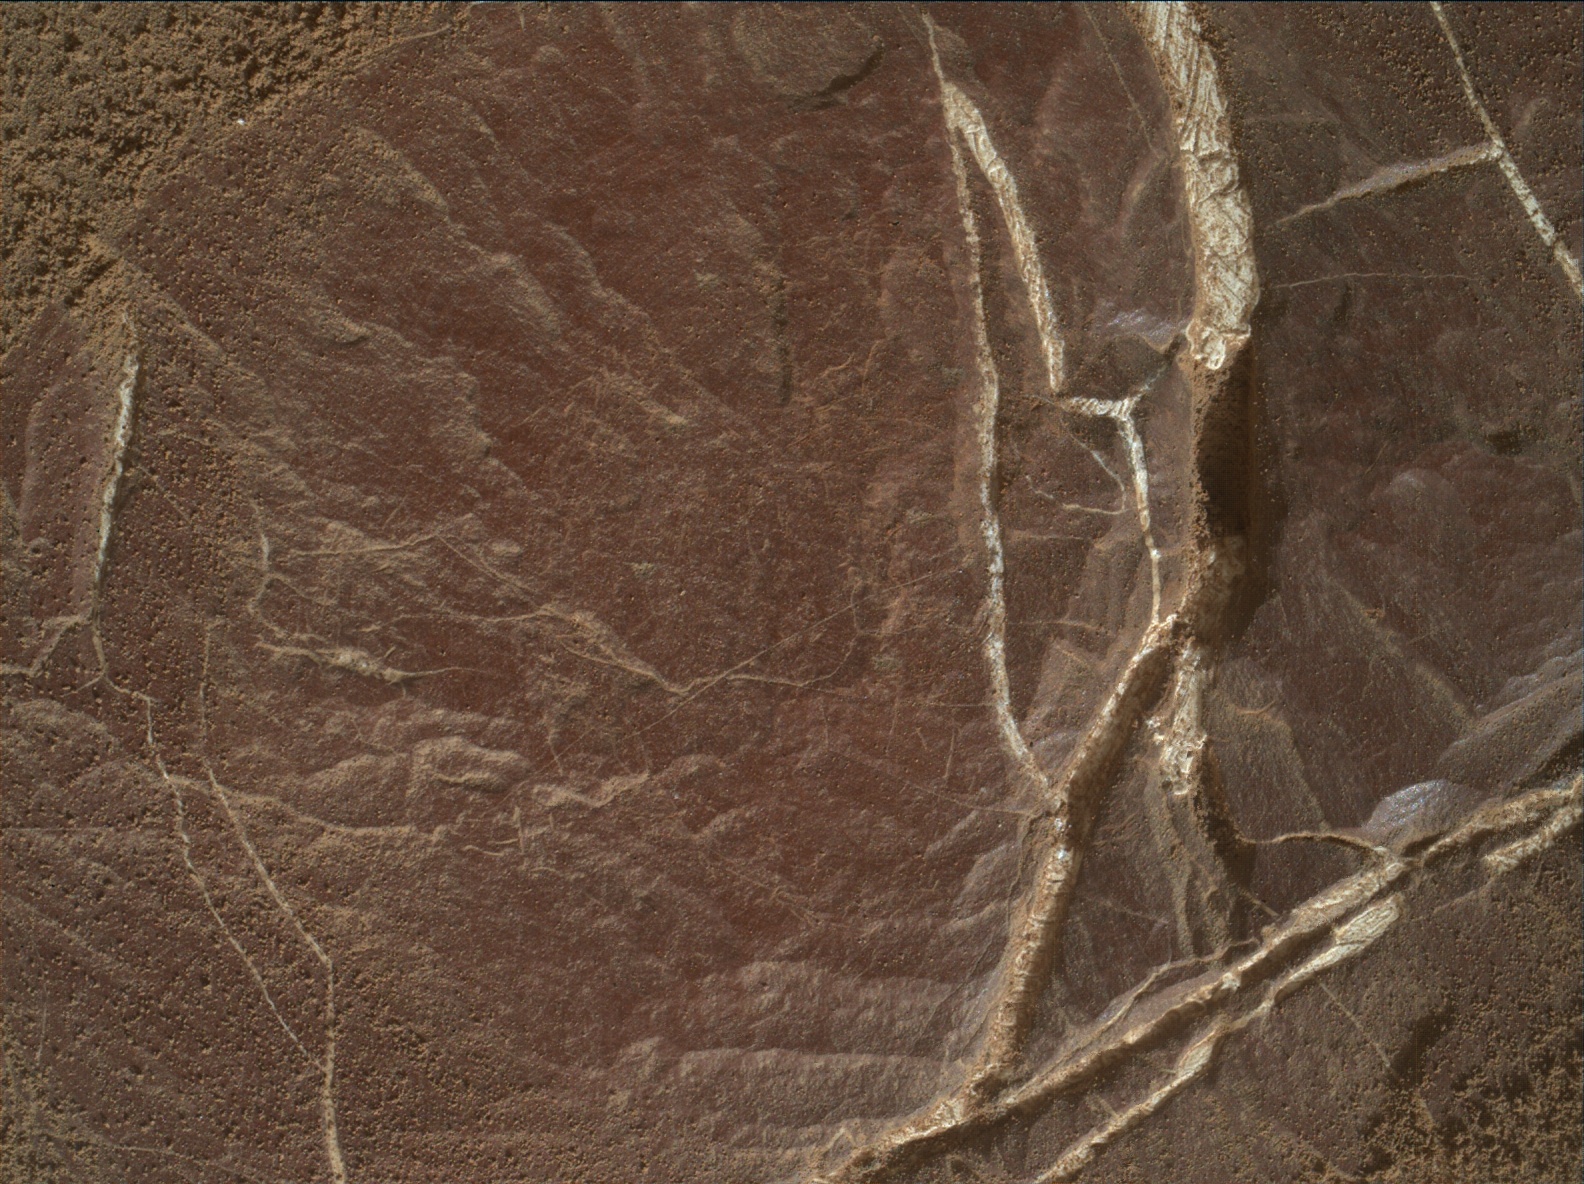 Nasa's Mars rover Curiosity acquired this image using its Mars Hand Lens Imager (MAHLI) on Sol 2044